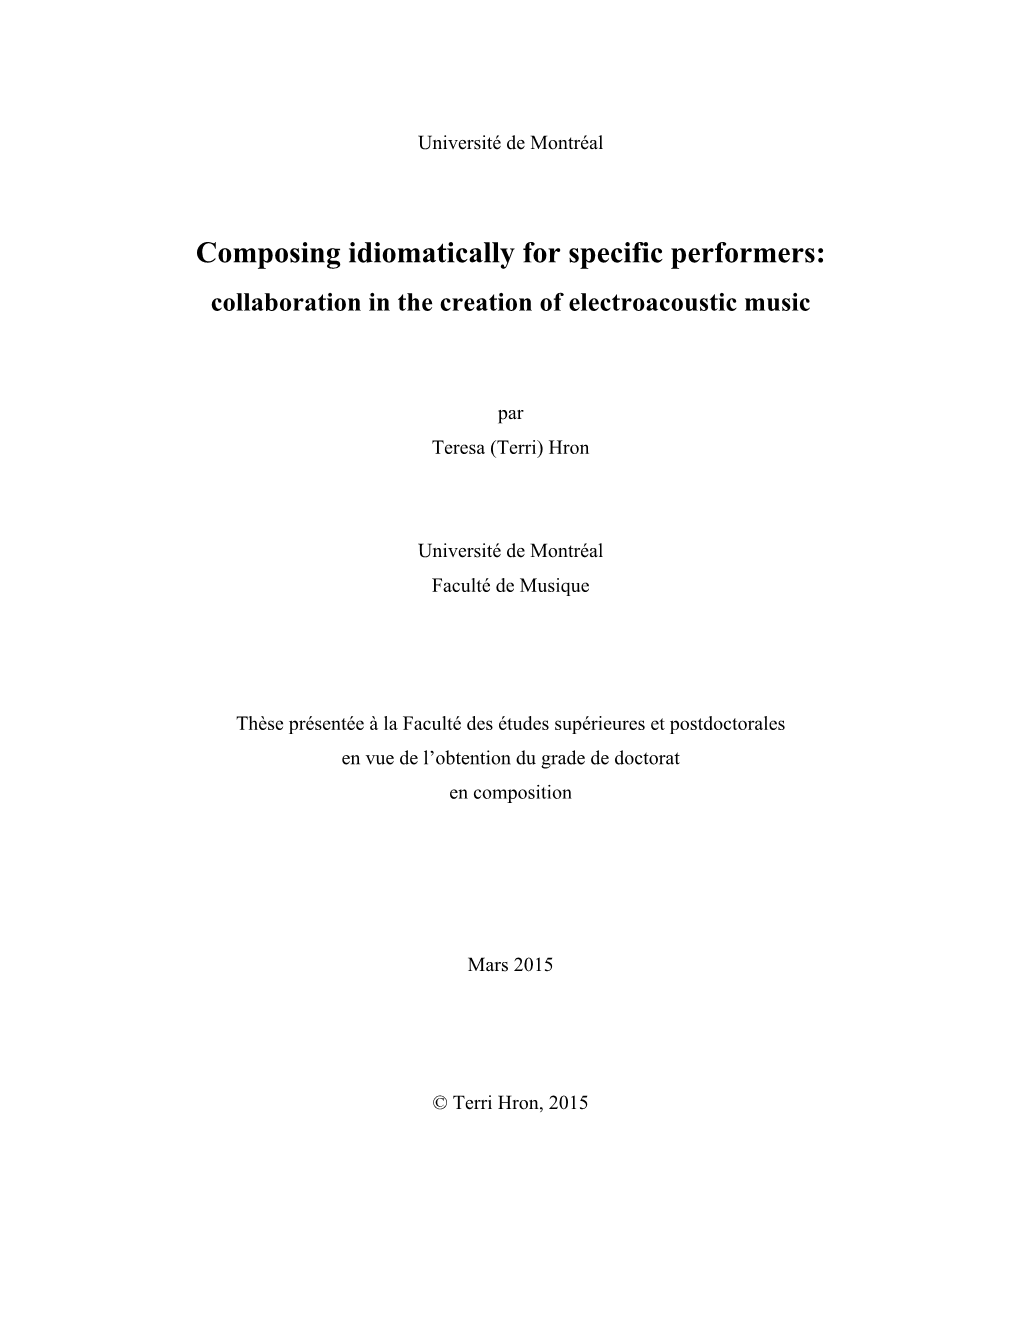 Composing Idiomatically for Specific Performers: Collaboration in the Creation of Electroacoustic Music